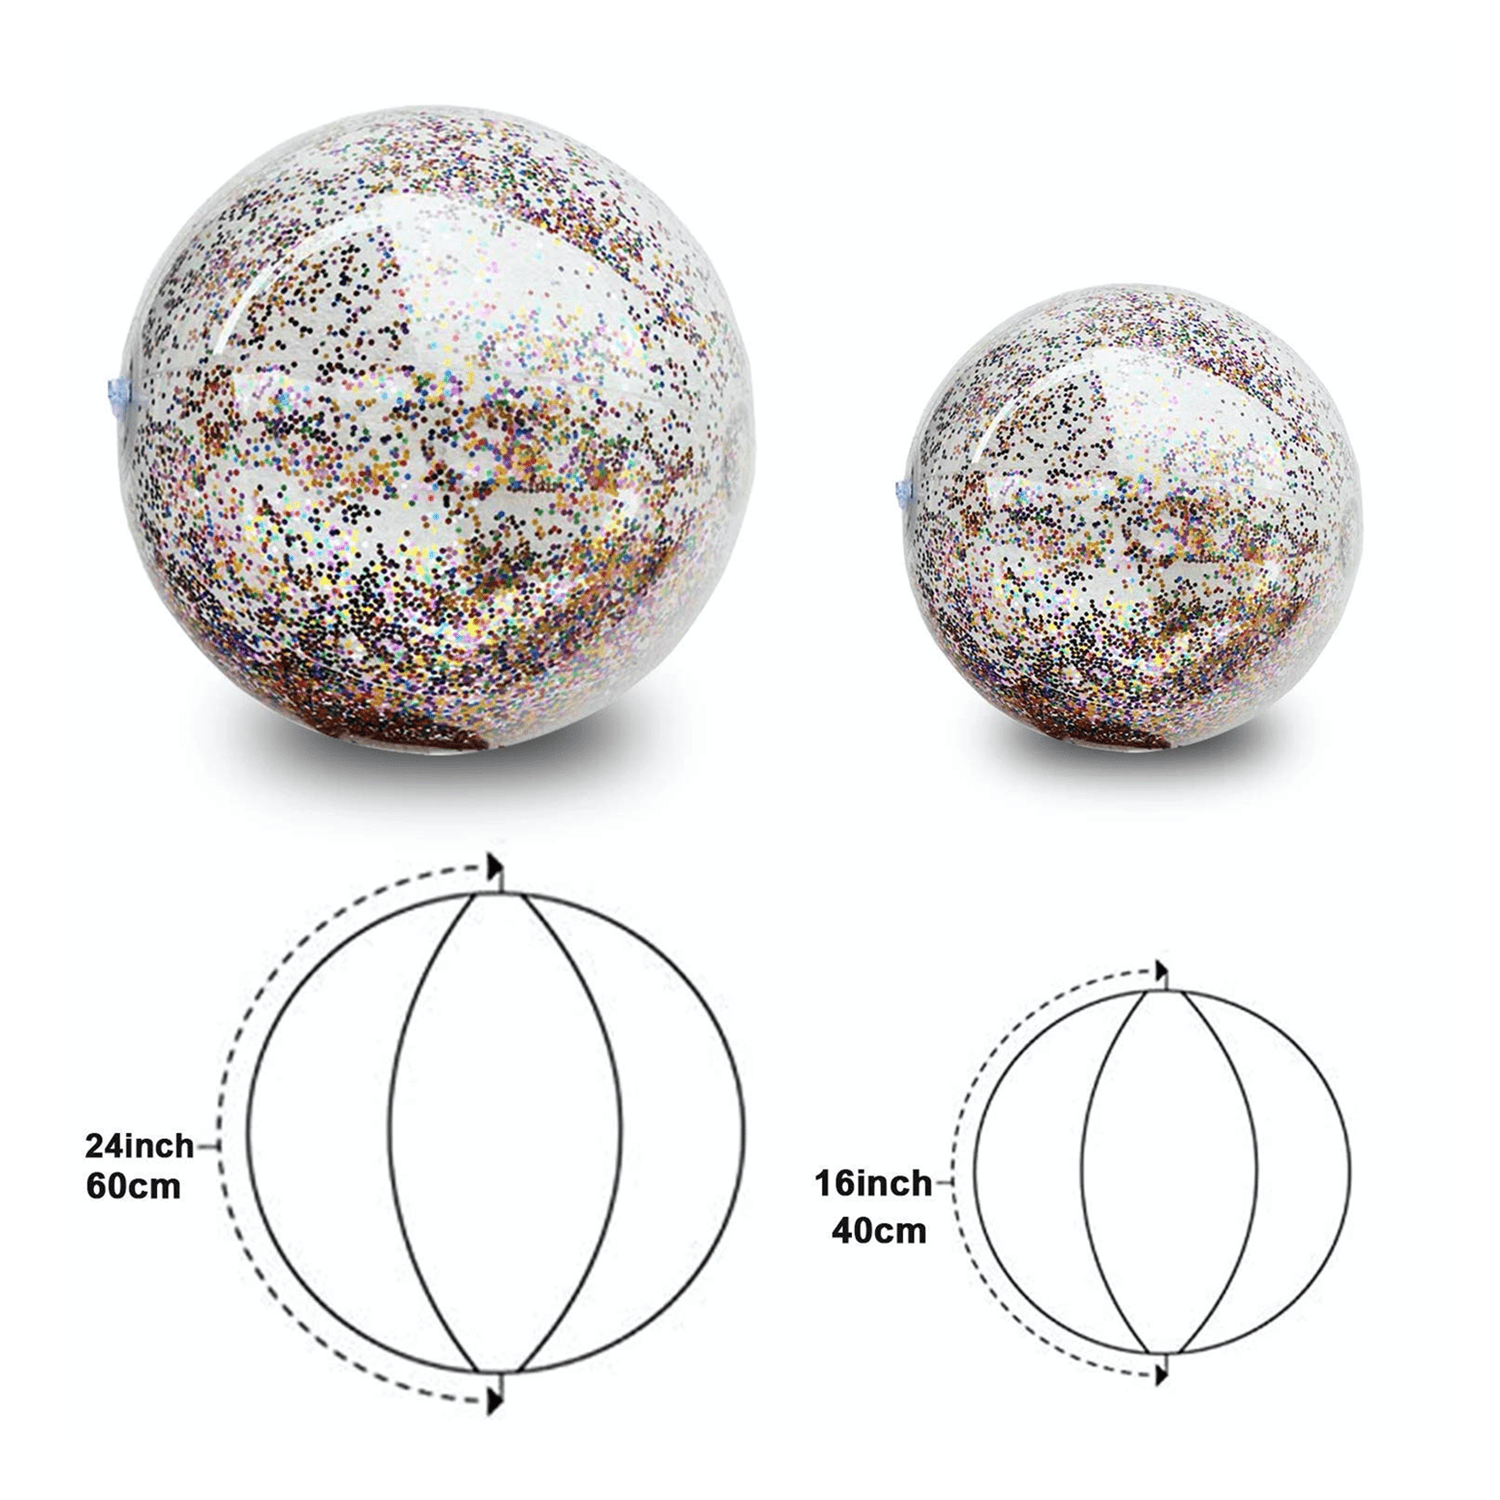  Skylety 8 Pieces Inflatable Clear Glitter Beach Balls Confetti  Beach Balls Transparent Swimming Pool Party Ball for Summer Beach, Pool and  Party Favor (Gold) : Toys & Games